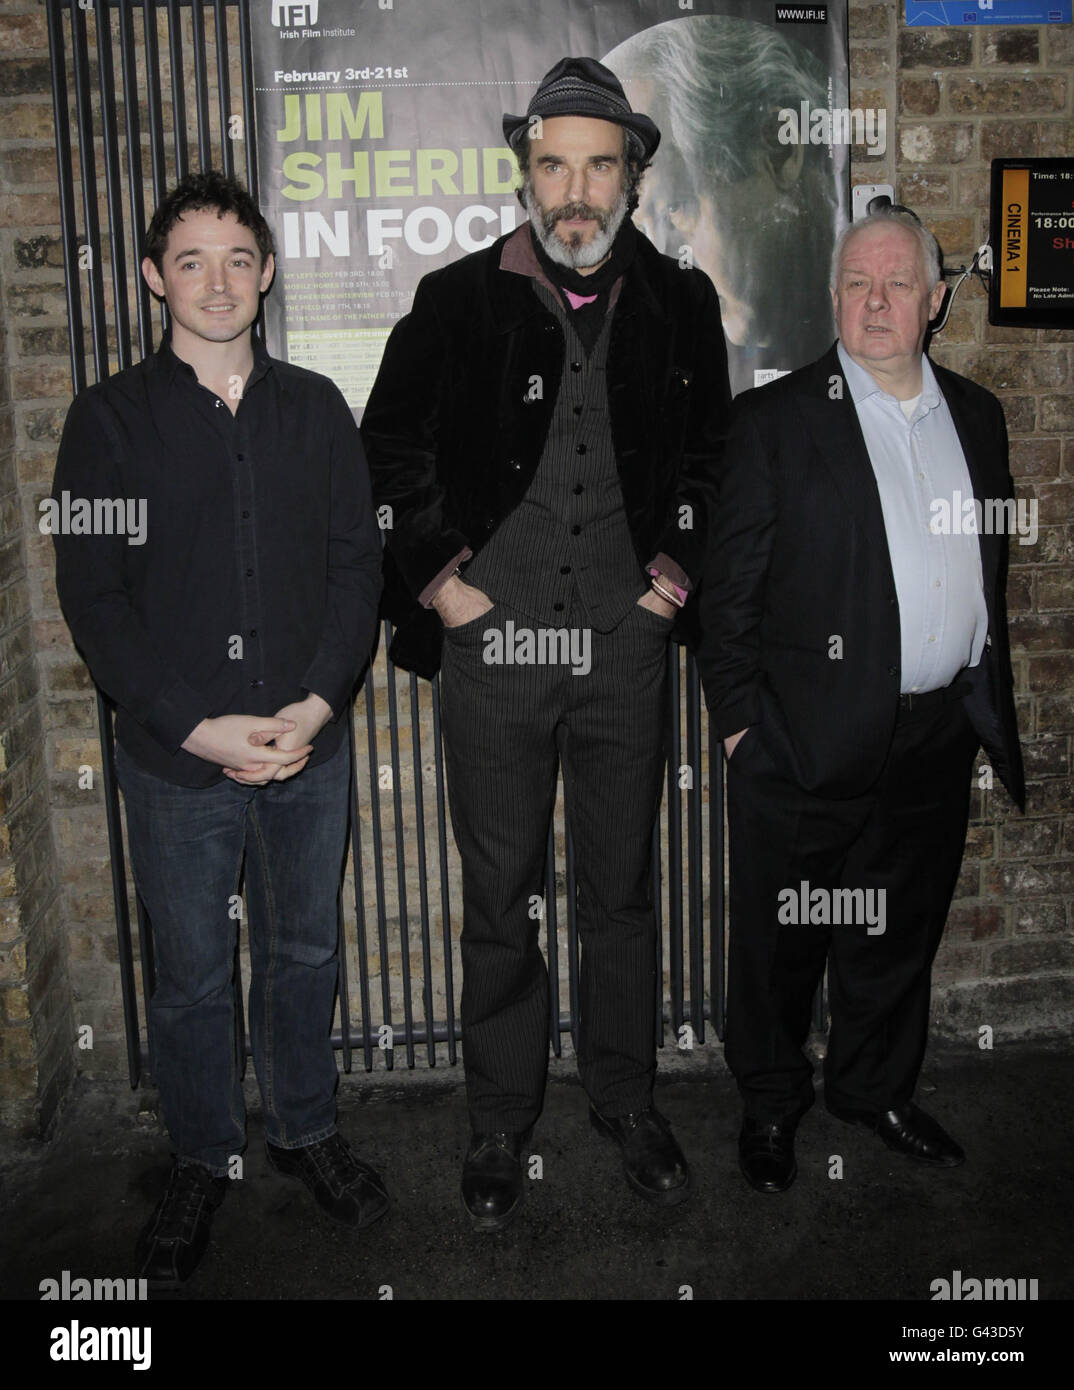 (left to right) Actors Hugh O'Connor and Daniel Day-Lewis and Director Jim Sheridan arrive at the IFI cinema in Dublin for a gala screening of My Left Foot, the opening film of the IFI's Jim Sheridan season. Stock Photo